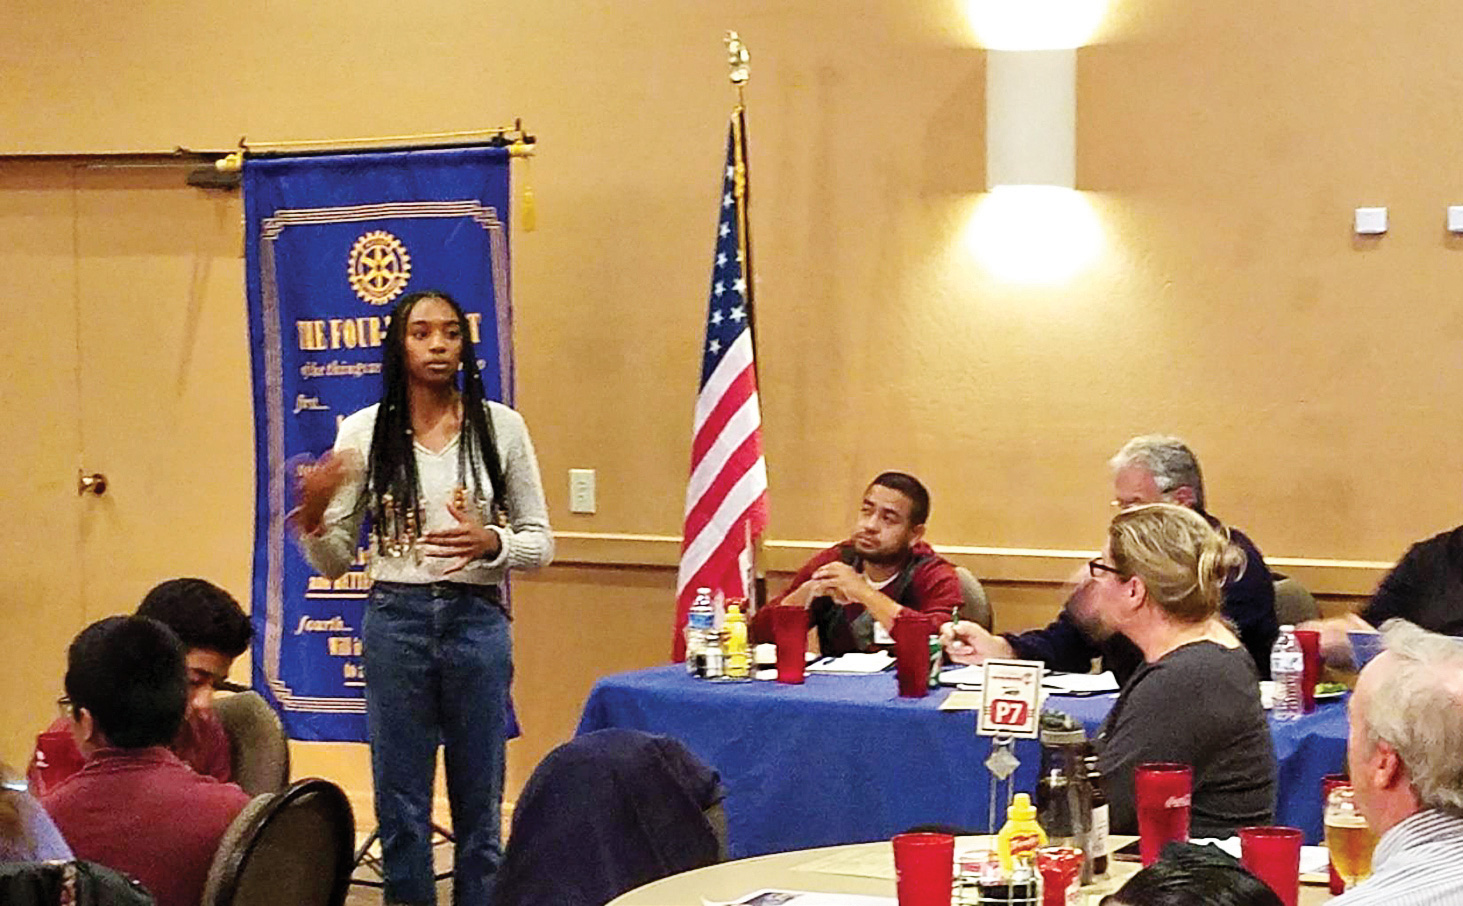 Kyra Horton presents an Interact Club update during a Rotary Club of Surprise meeting.